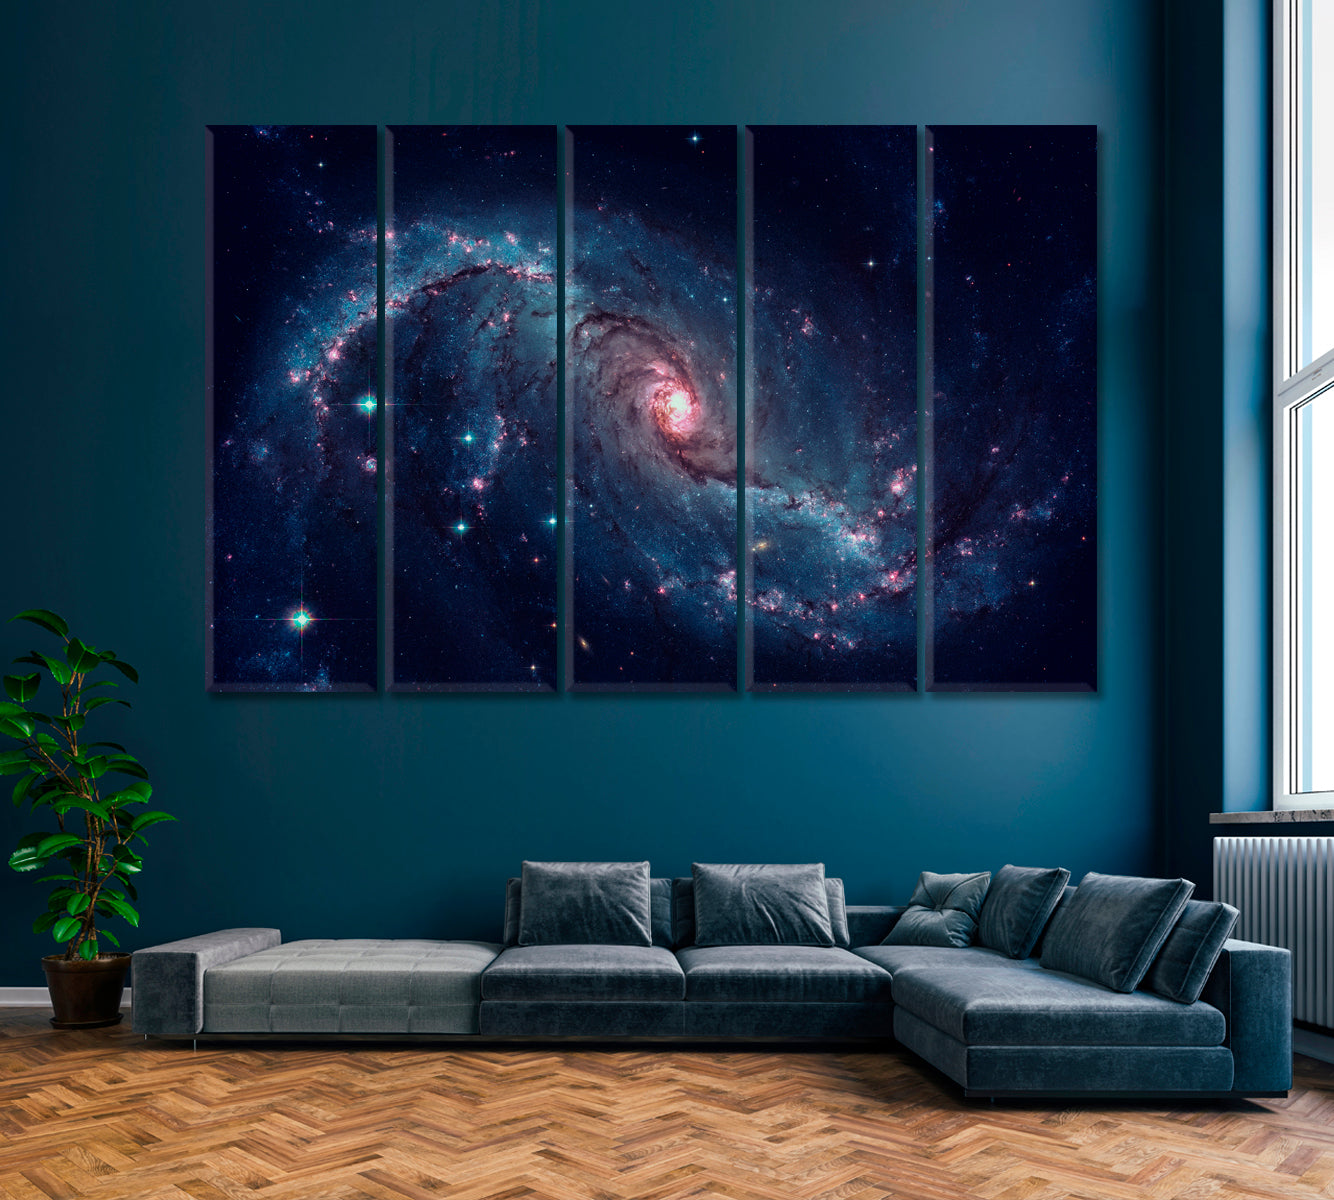 Stellar Nursery in the Arms of NGC 1672 Canvas Print ArtLexy 5 Panels 36"x24" inches 